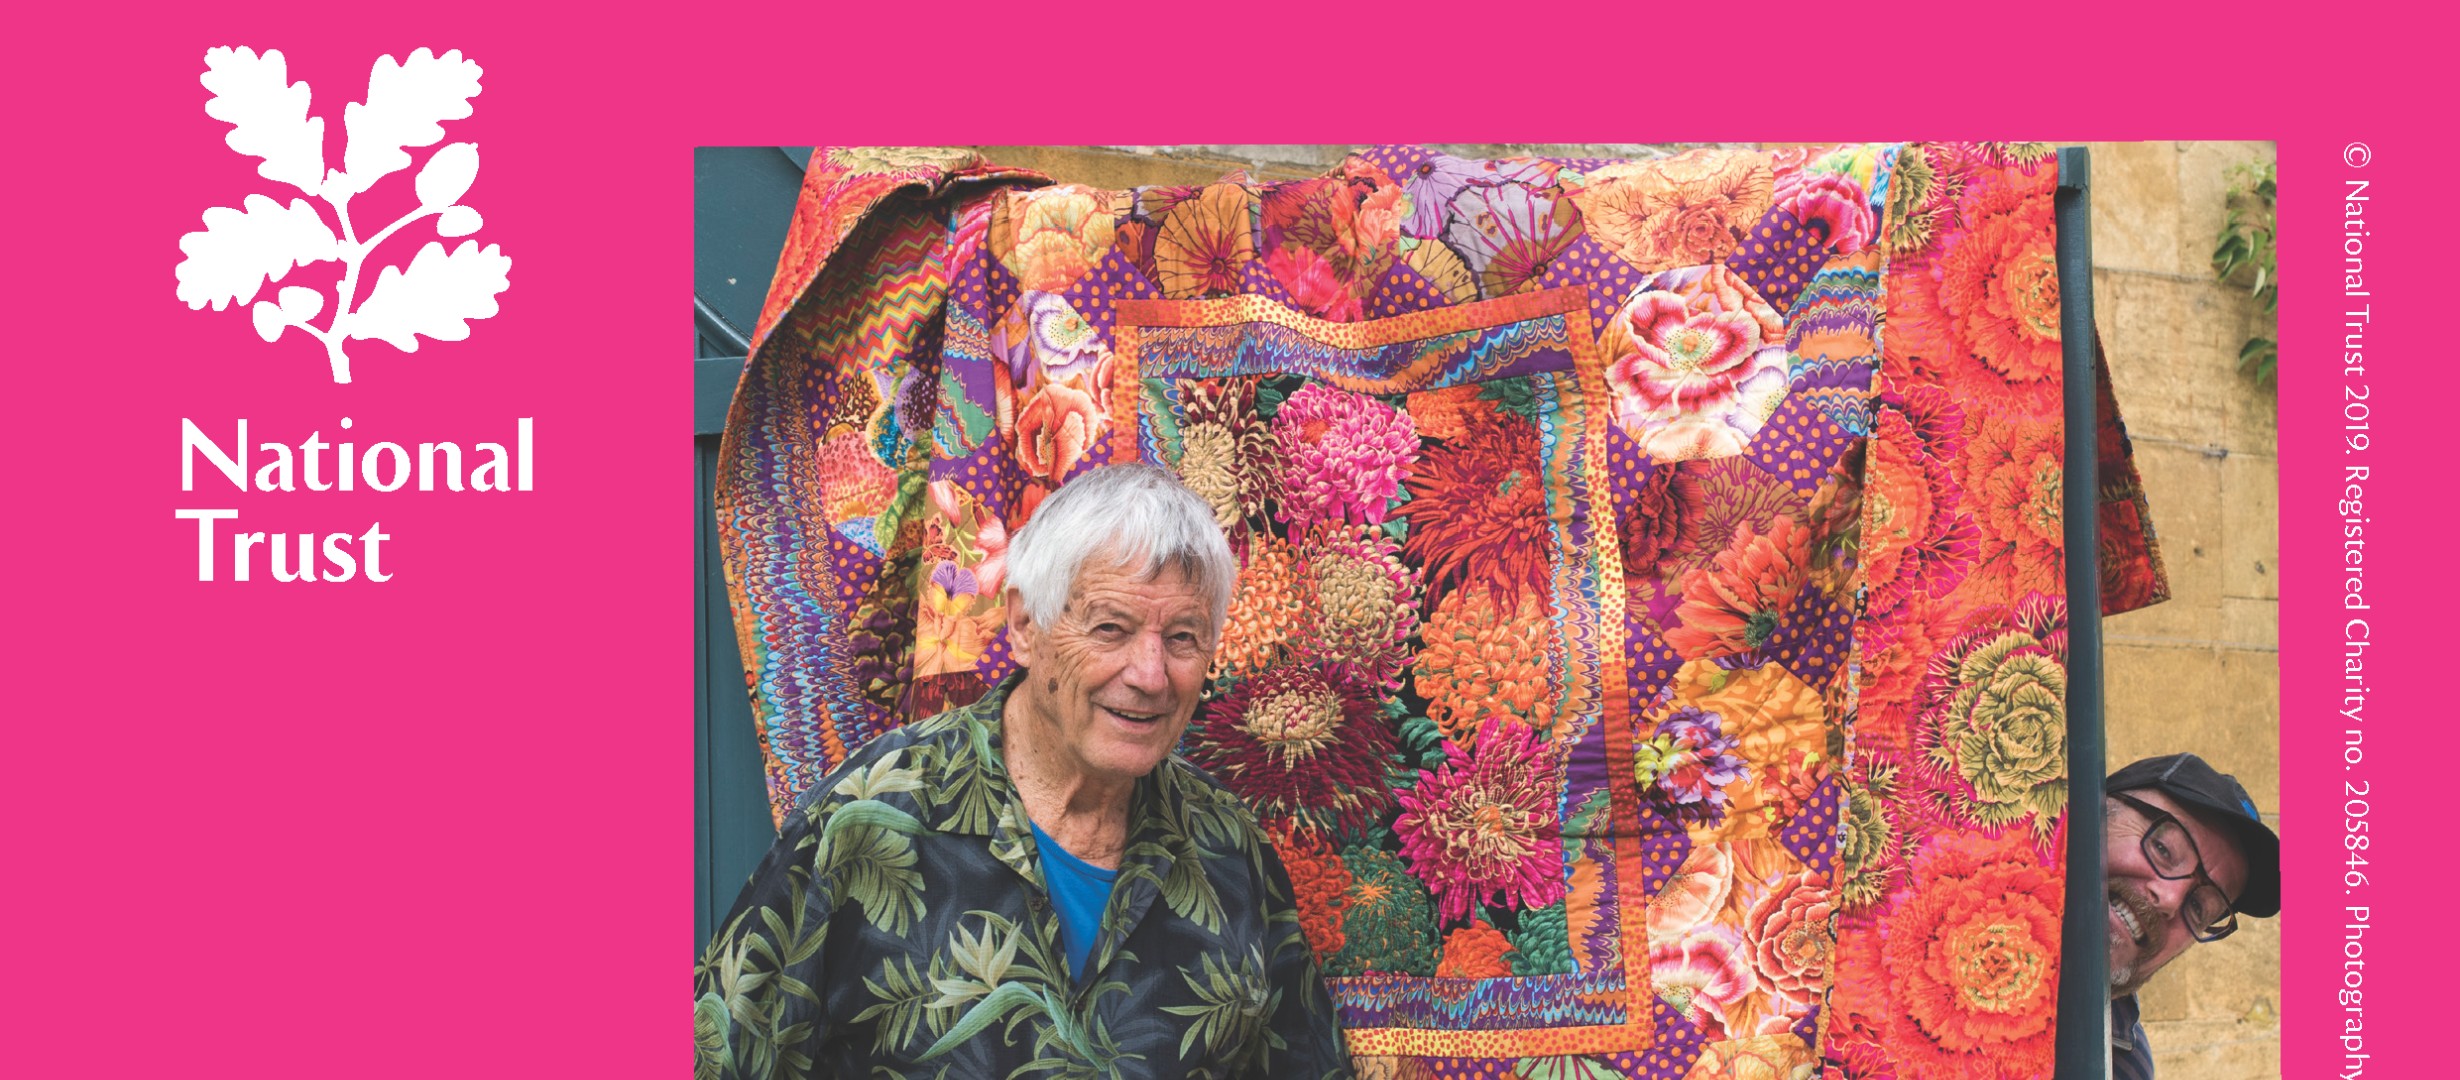 A bright pink background, to the left is the white oak leaf logo of the National Trust, to the right pictured is Kaffe Fassett standing in front of one of his colourful quilts.